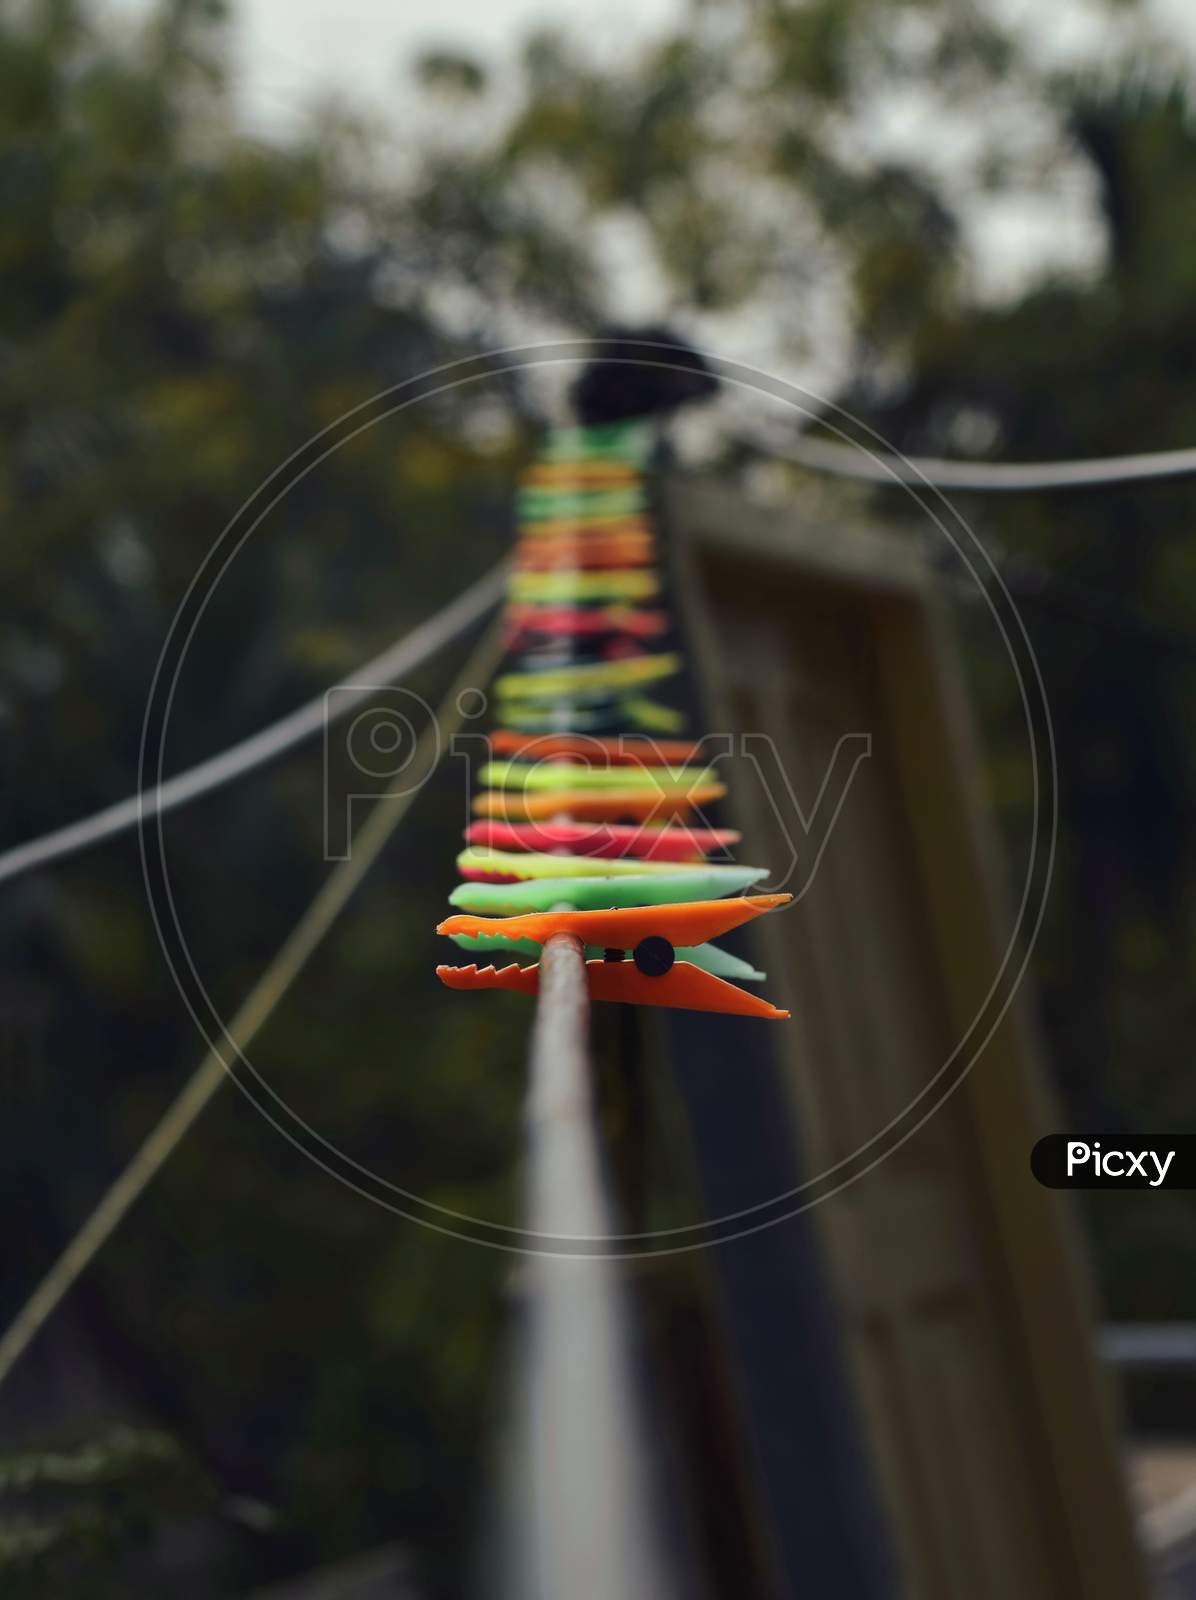 Some plastic clips are on the rope with blurred background.